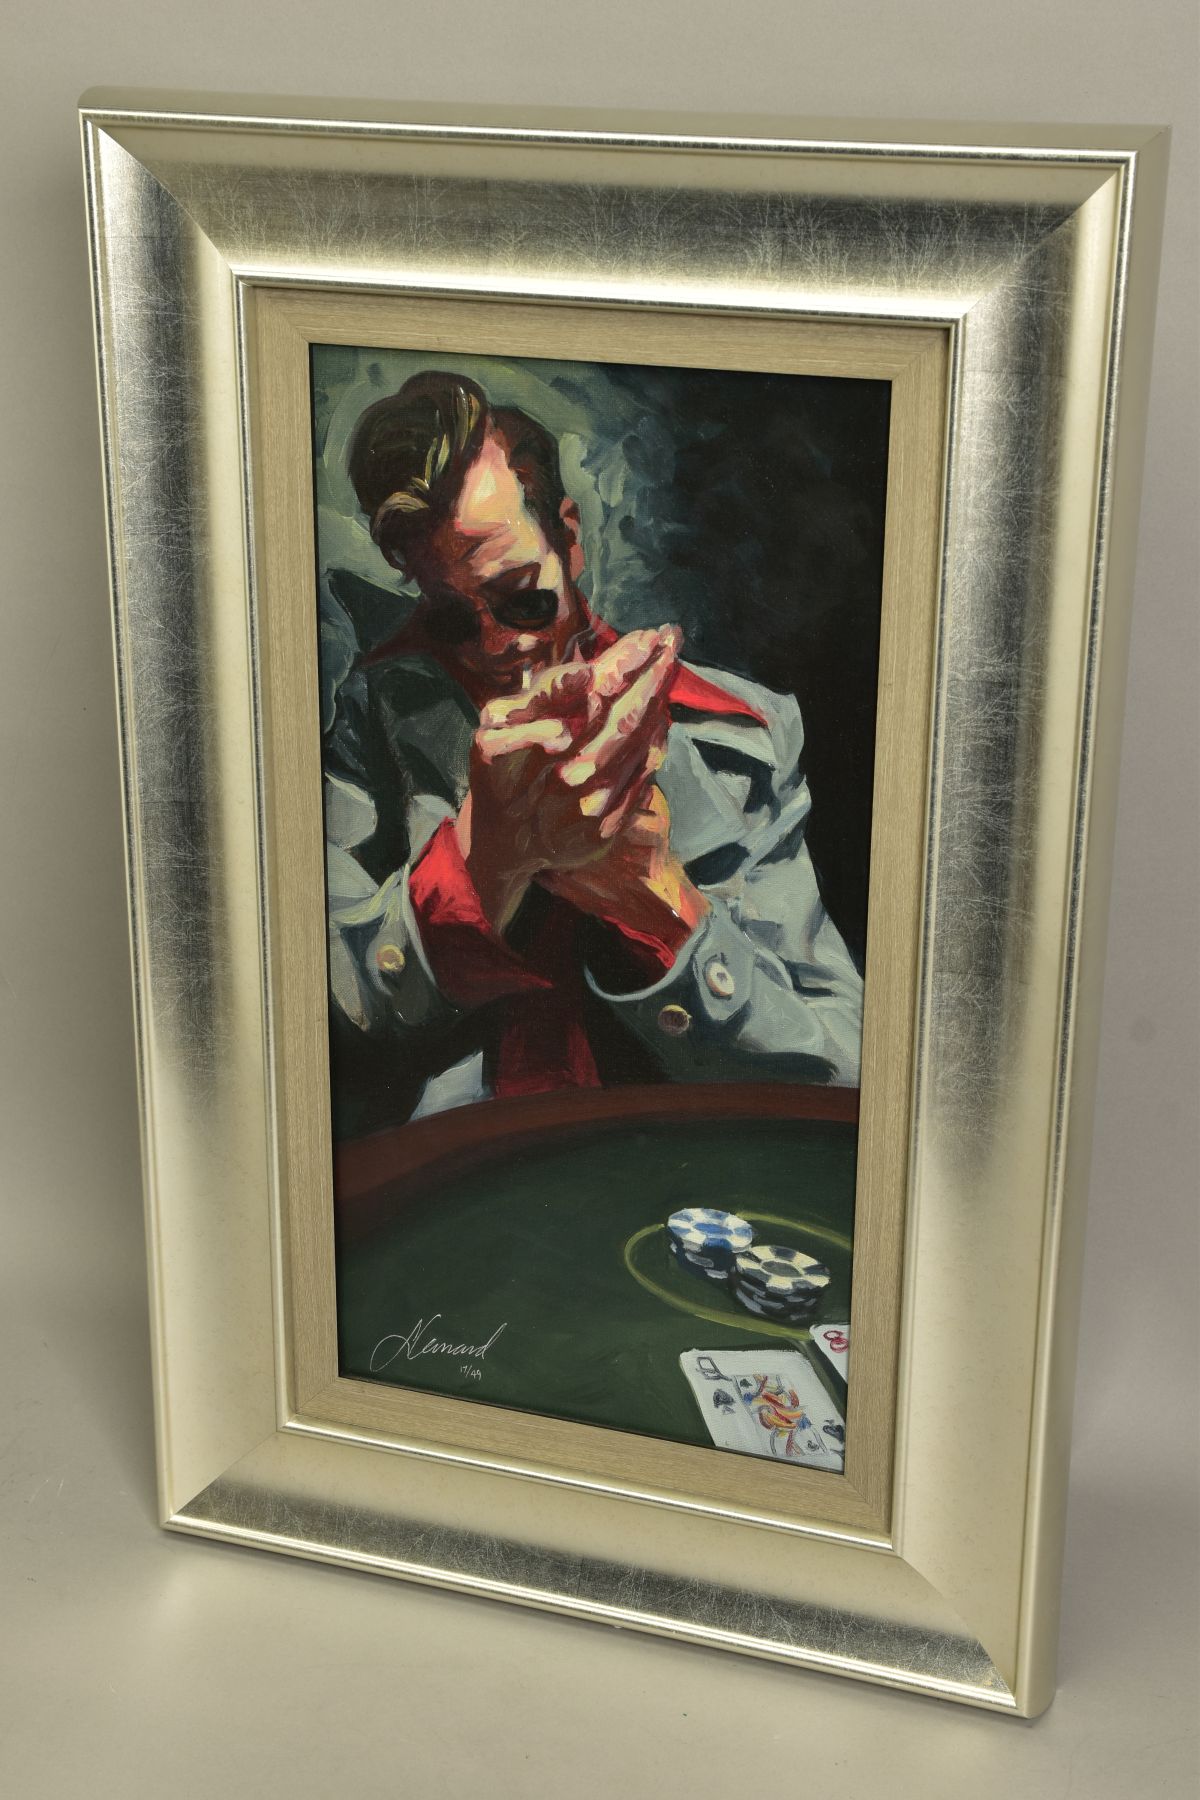 GABE LEONARD (AMERICAN CONTEMPORARY) 'THE PROFESSIONAL' a limited edition print of a gambler playing - Image 4 of 5